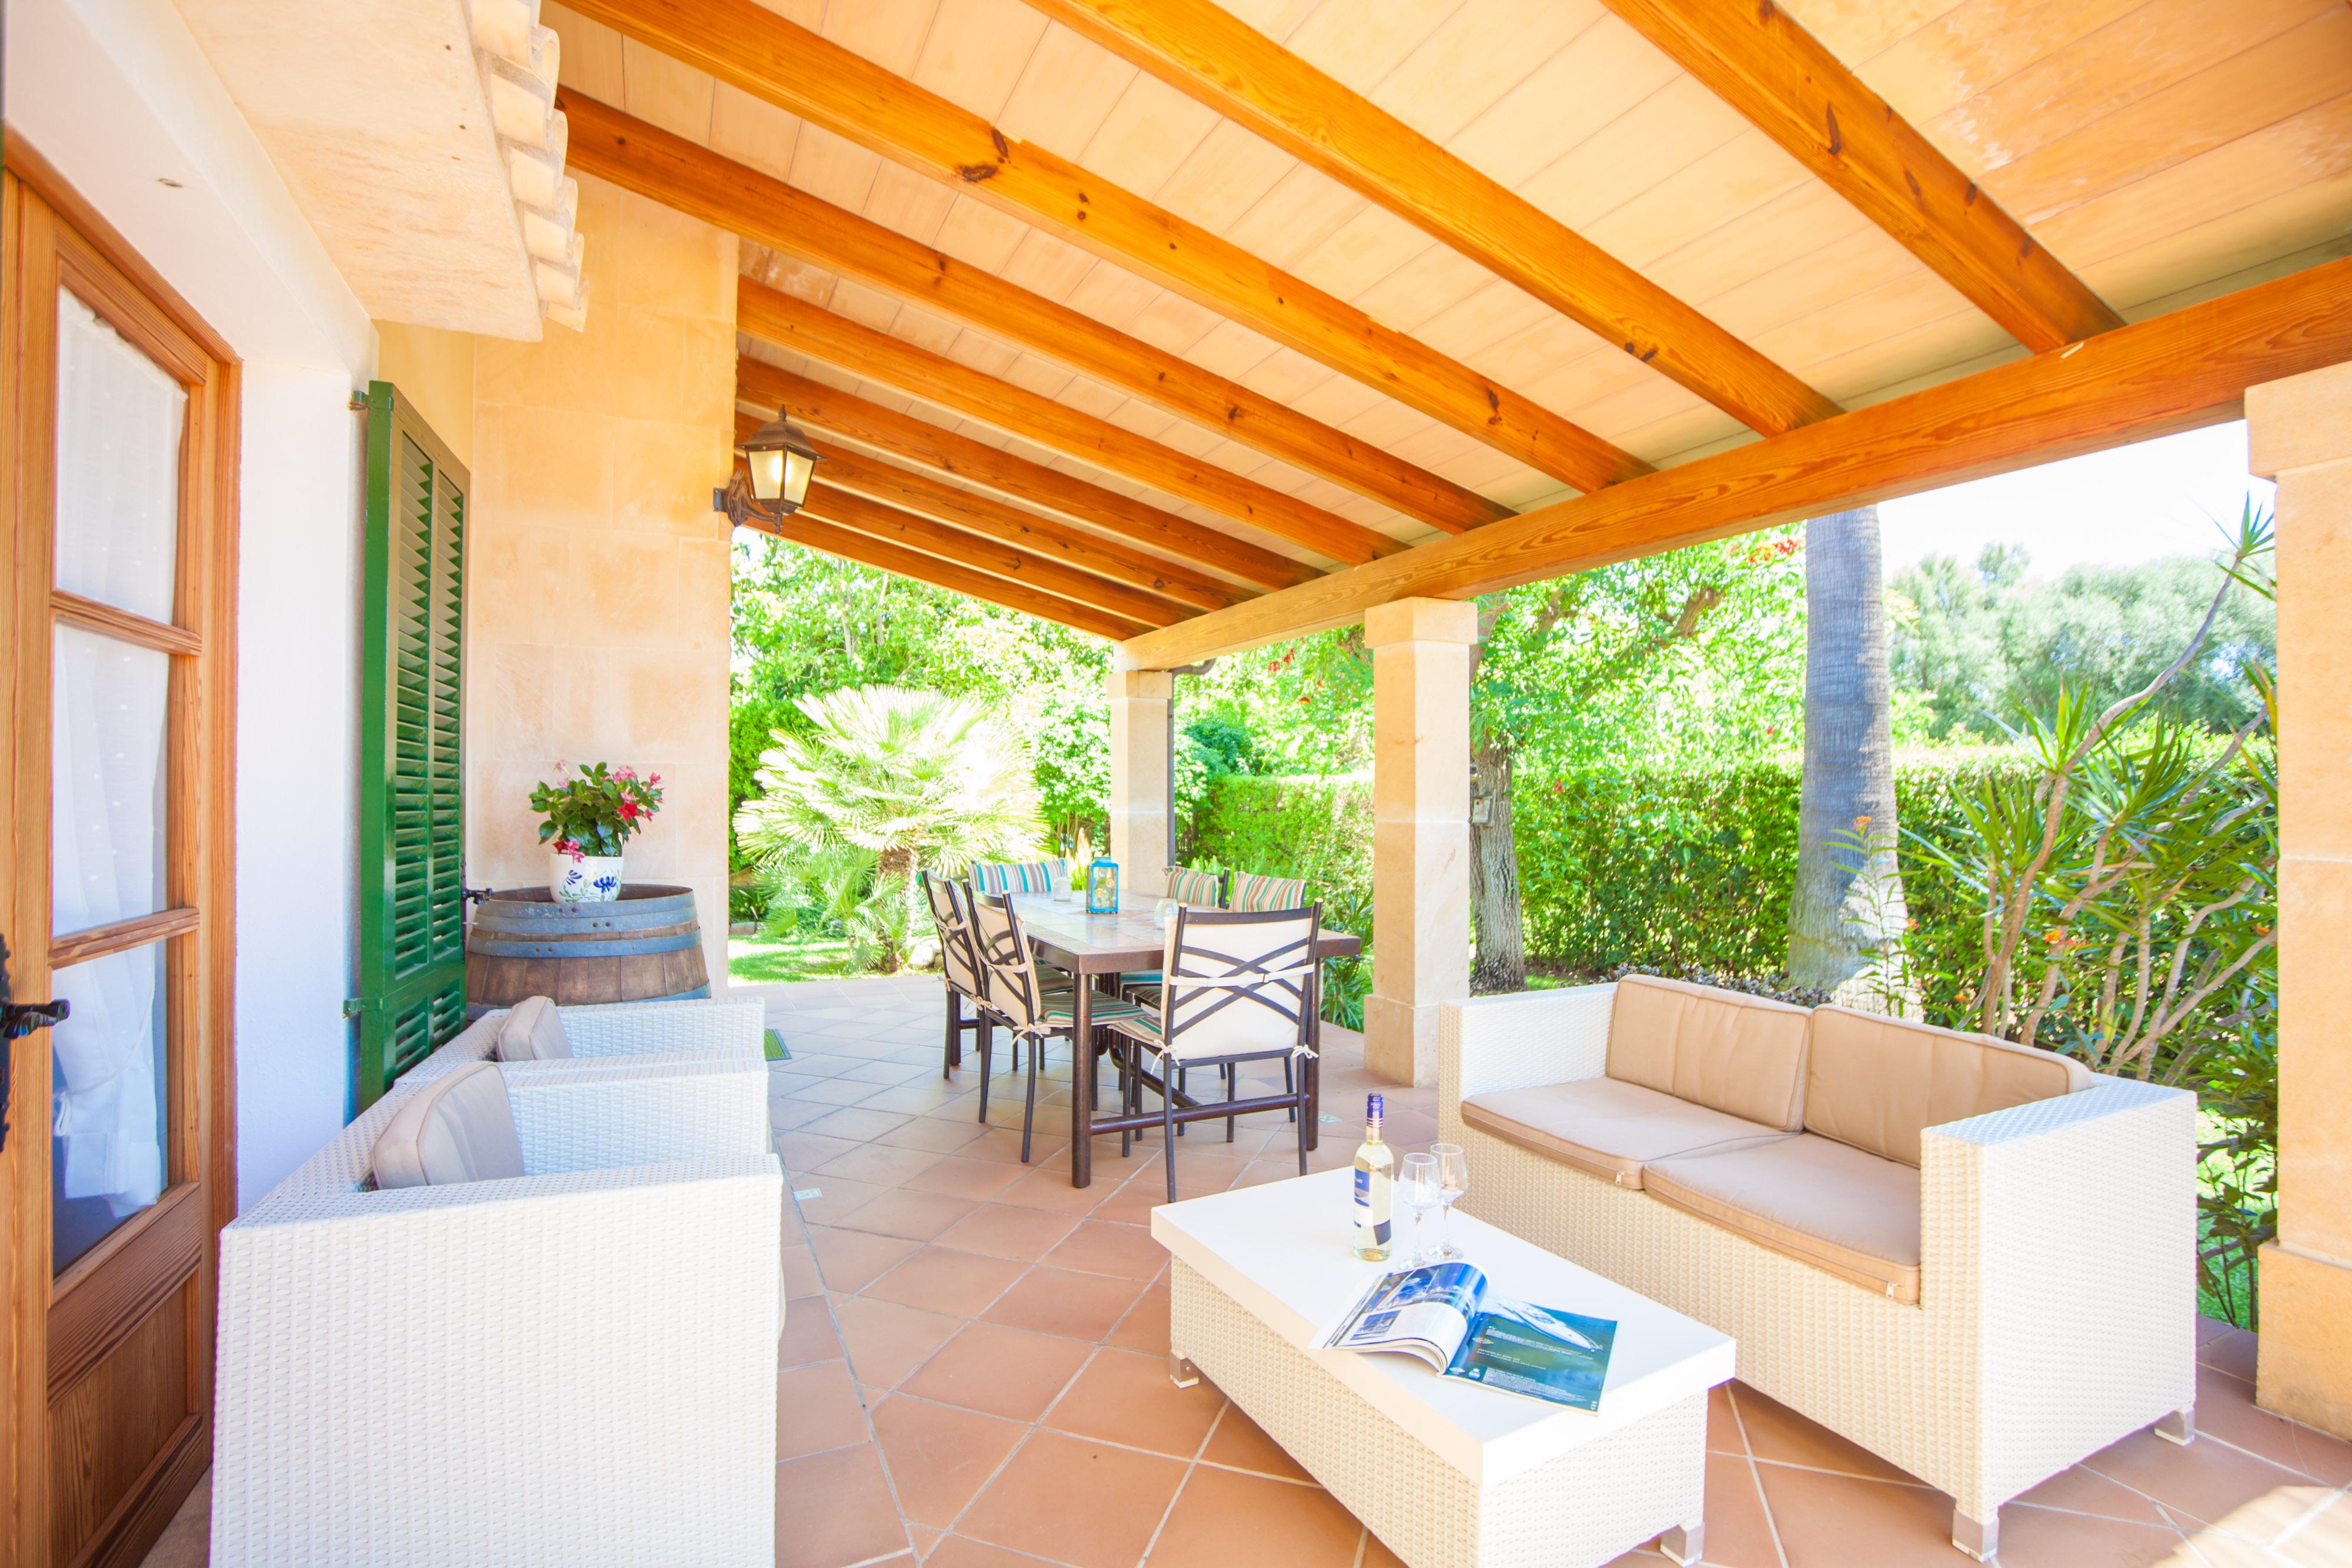 Property Image 1 - CAN BOI DEN CIFRE - Chalet with private garden in Pollensa. Free WiFi